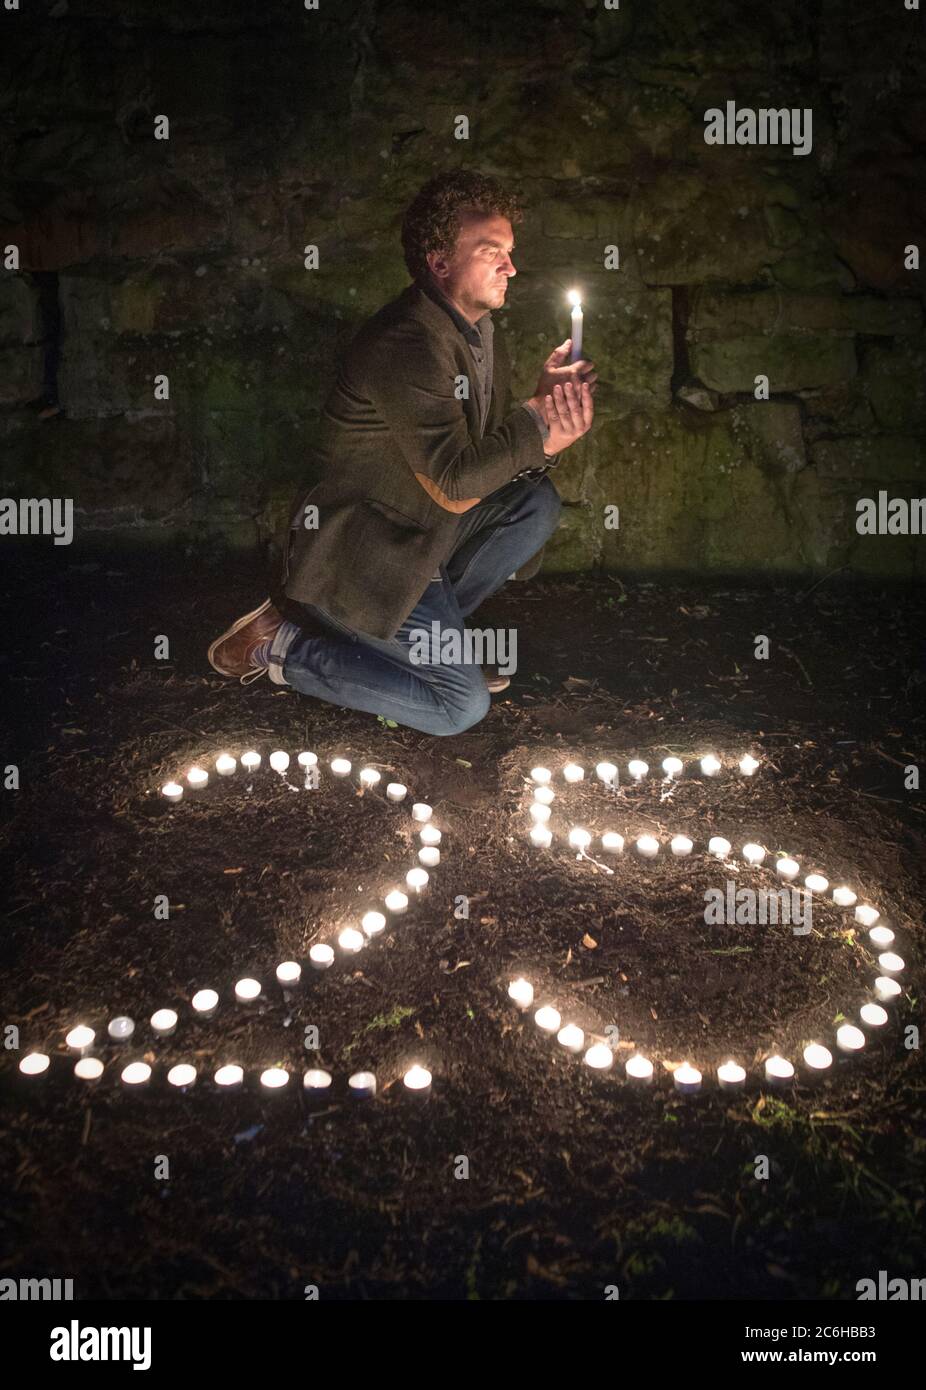 BAFTA award-winning film director Samir Mehanovic, who came to the UK as an immigrant from the Bosnian war in 1995 and now lives in Edinburgh, lights candles to commemorate the 25th anniversary of the Srebrenica genocide. Stock Photo